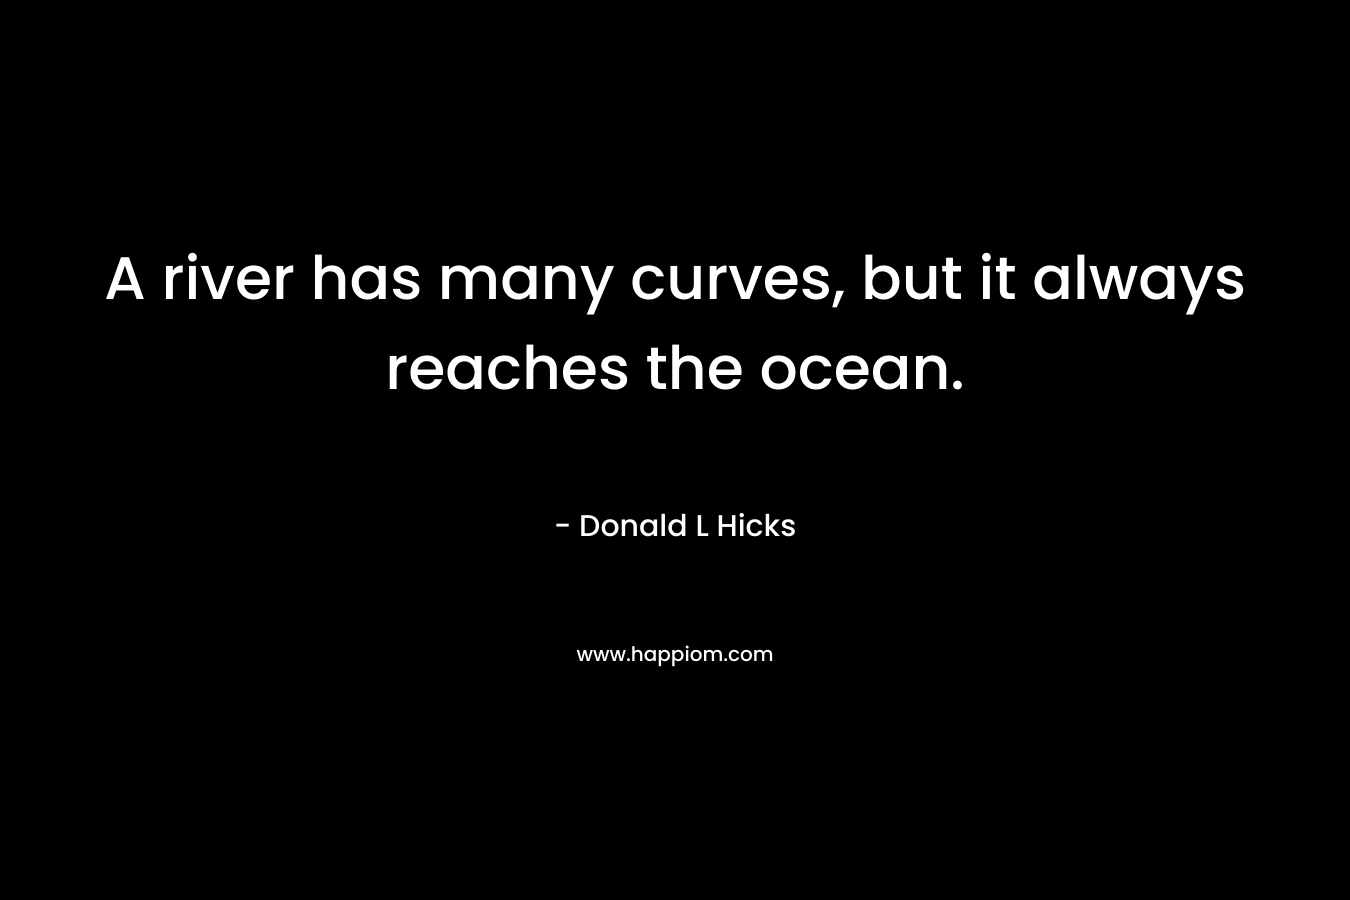 A river has many curves, but it always reaches the ocean. – Donald L Hicks